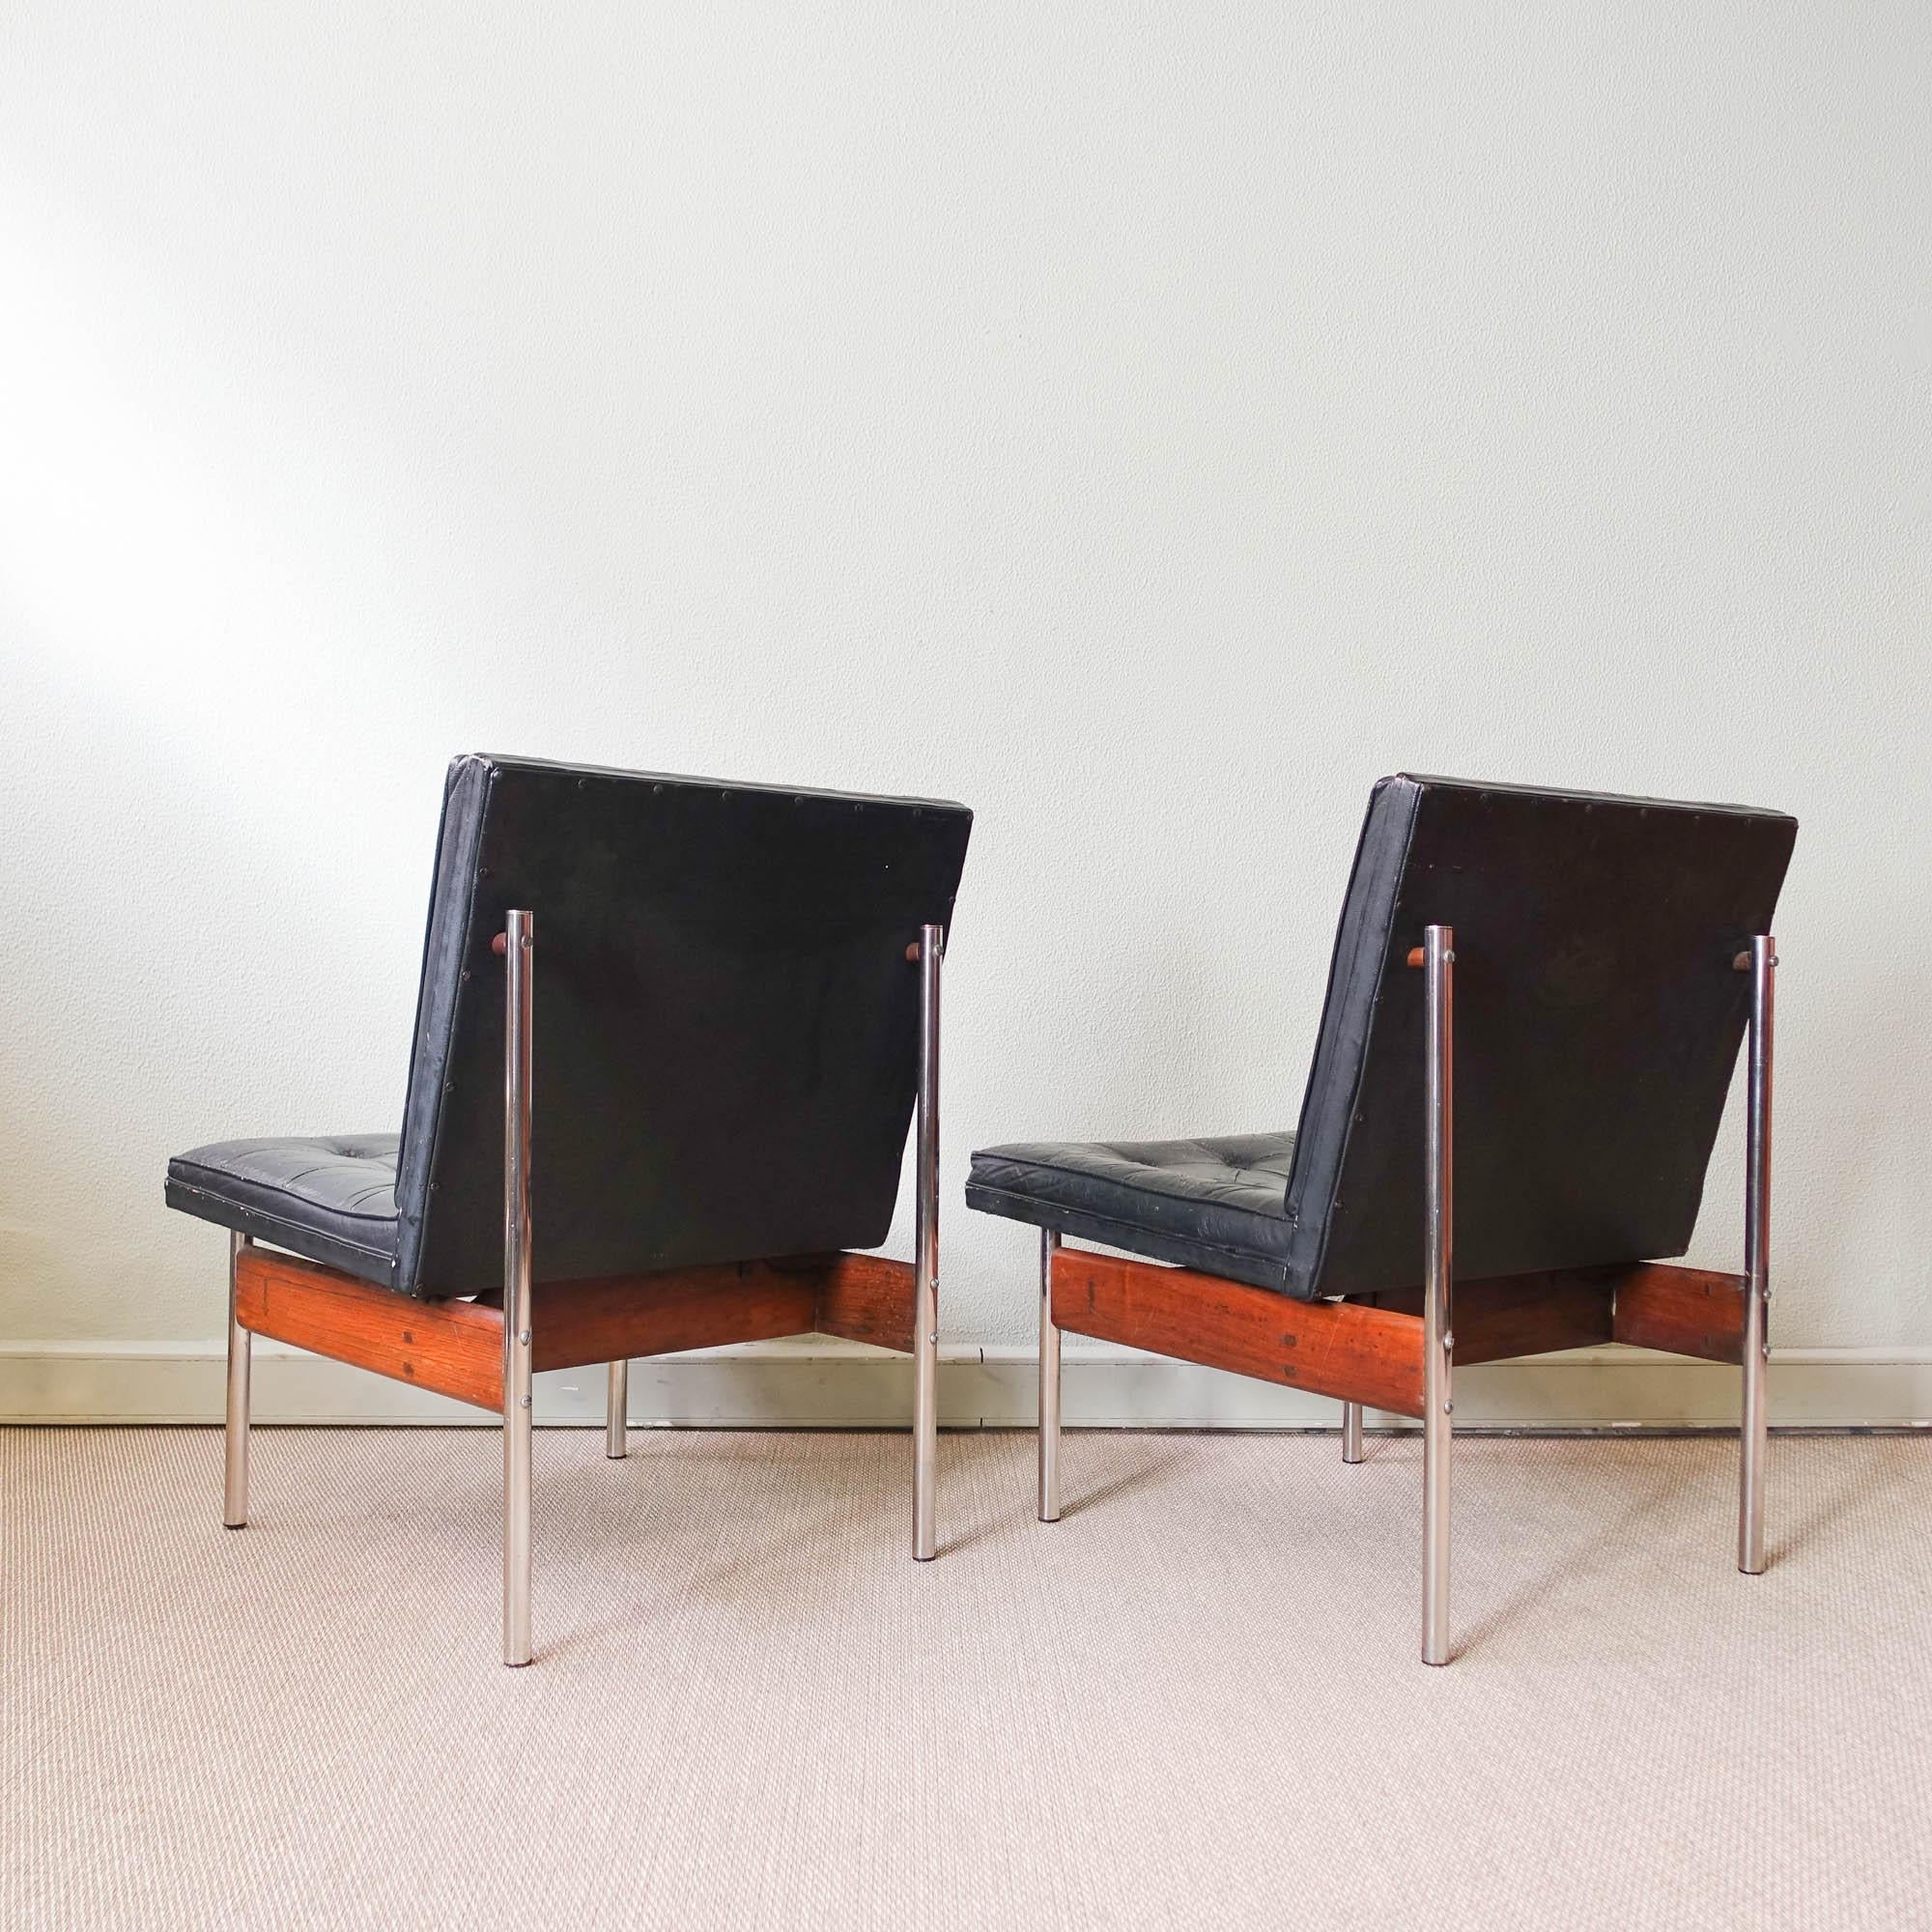 Brazilian Pair of Lounge Chairs by Móveis Cimo, 1970's For Sale